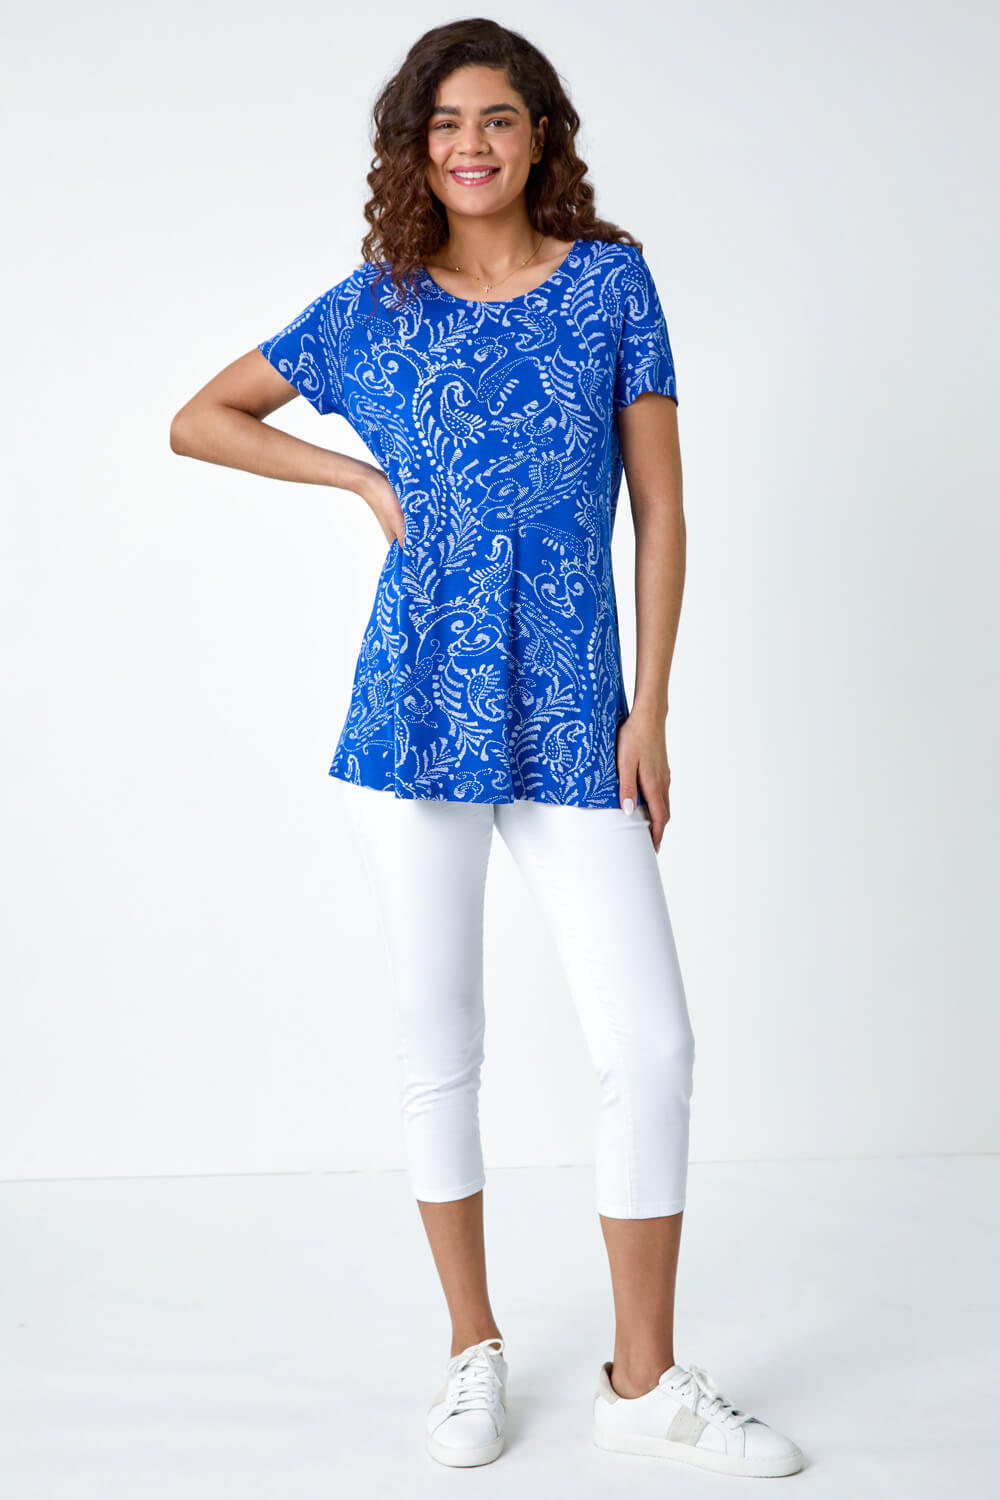 Blue Paisley Bar Back Stretch Tunic Top, Image 2 of 5